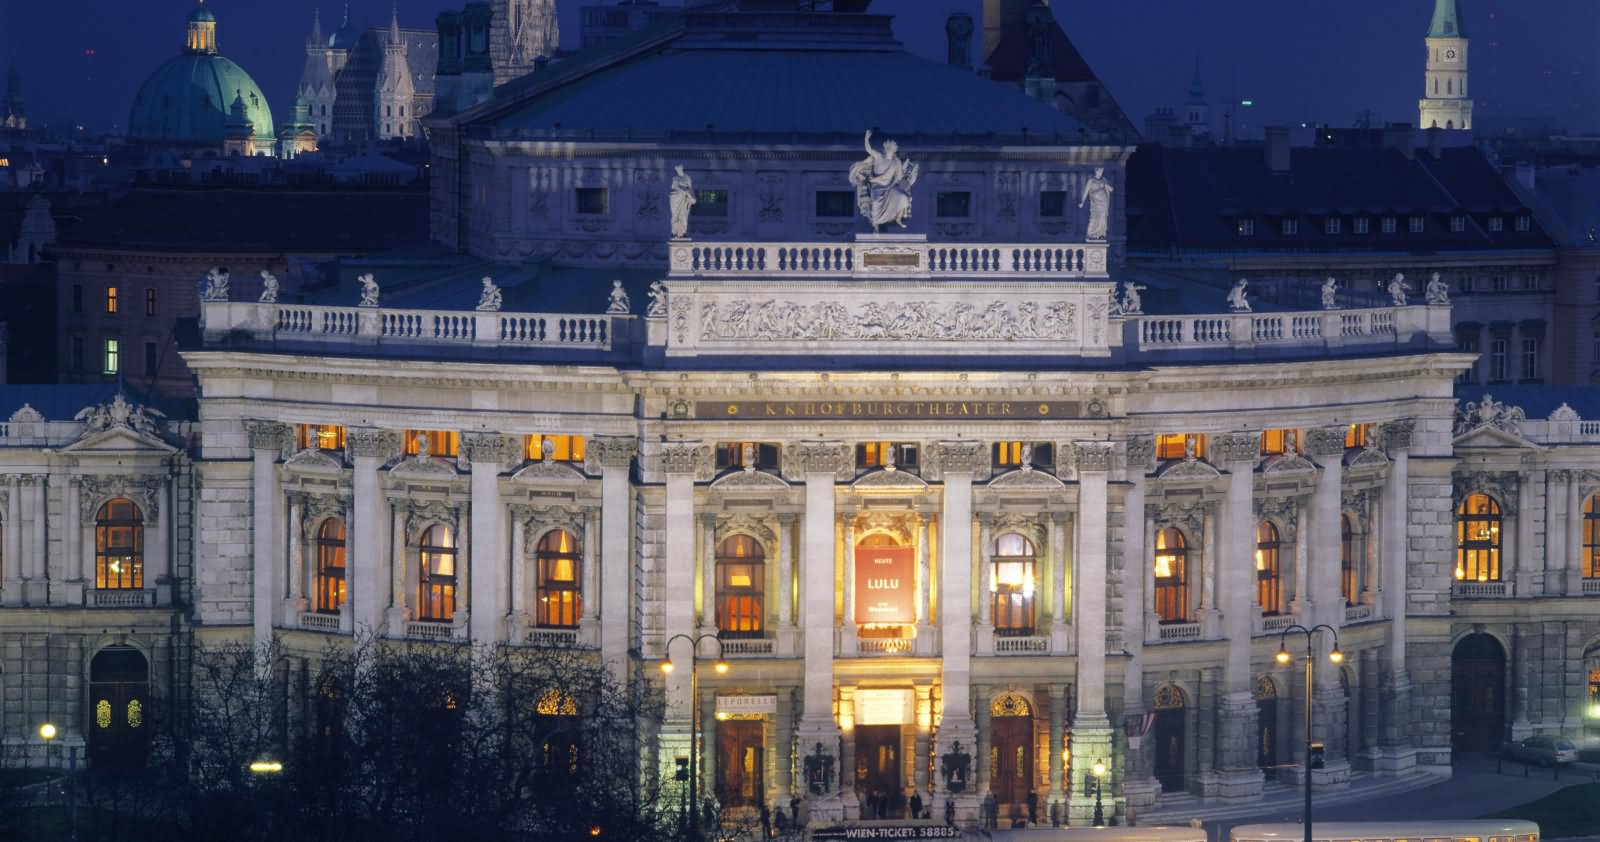 Birds Eye View Of The Main Entrance Of The Burgtheater